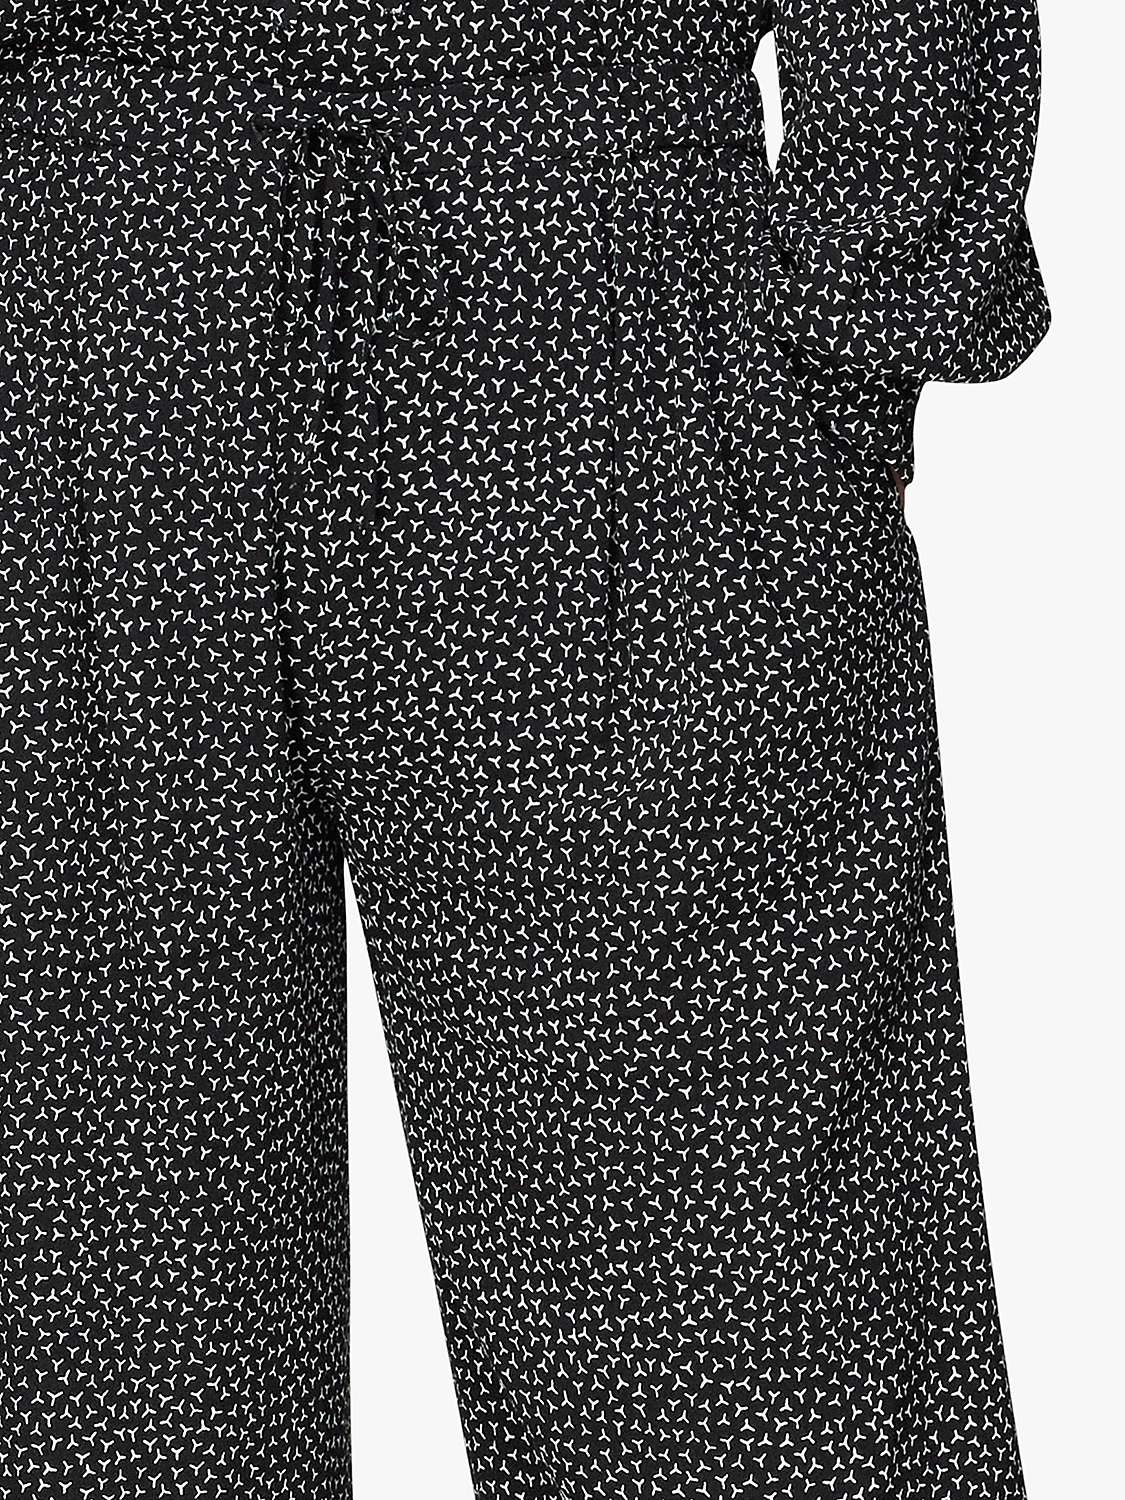 Buy Whistles Scattered Y Print Trousers, Black/White Online at johnlewis.com